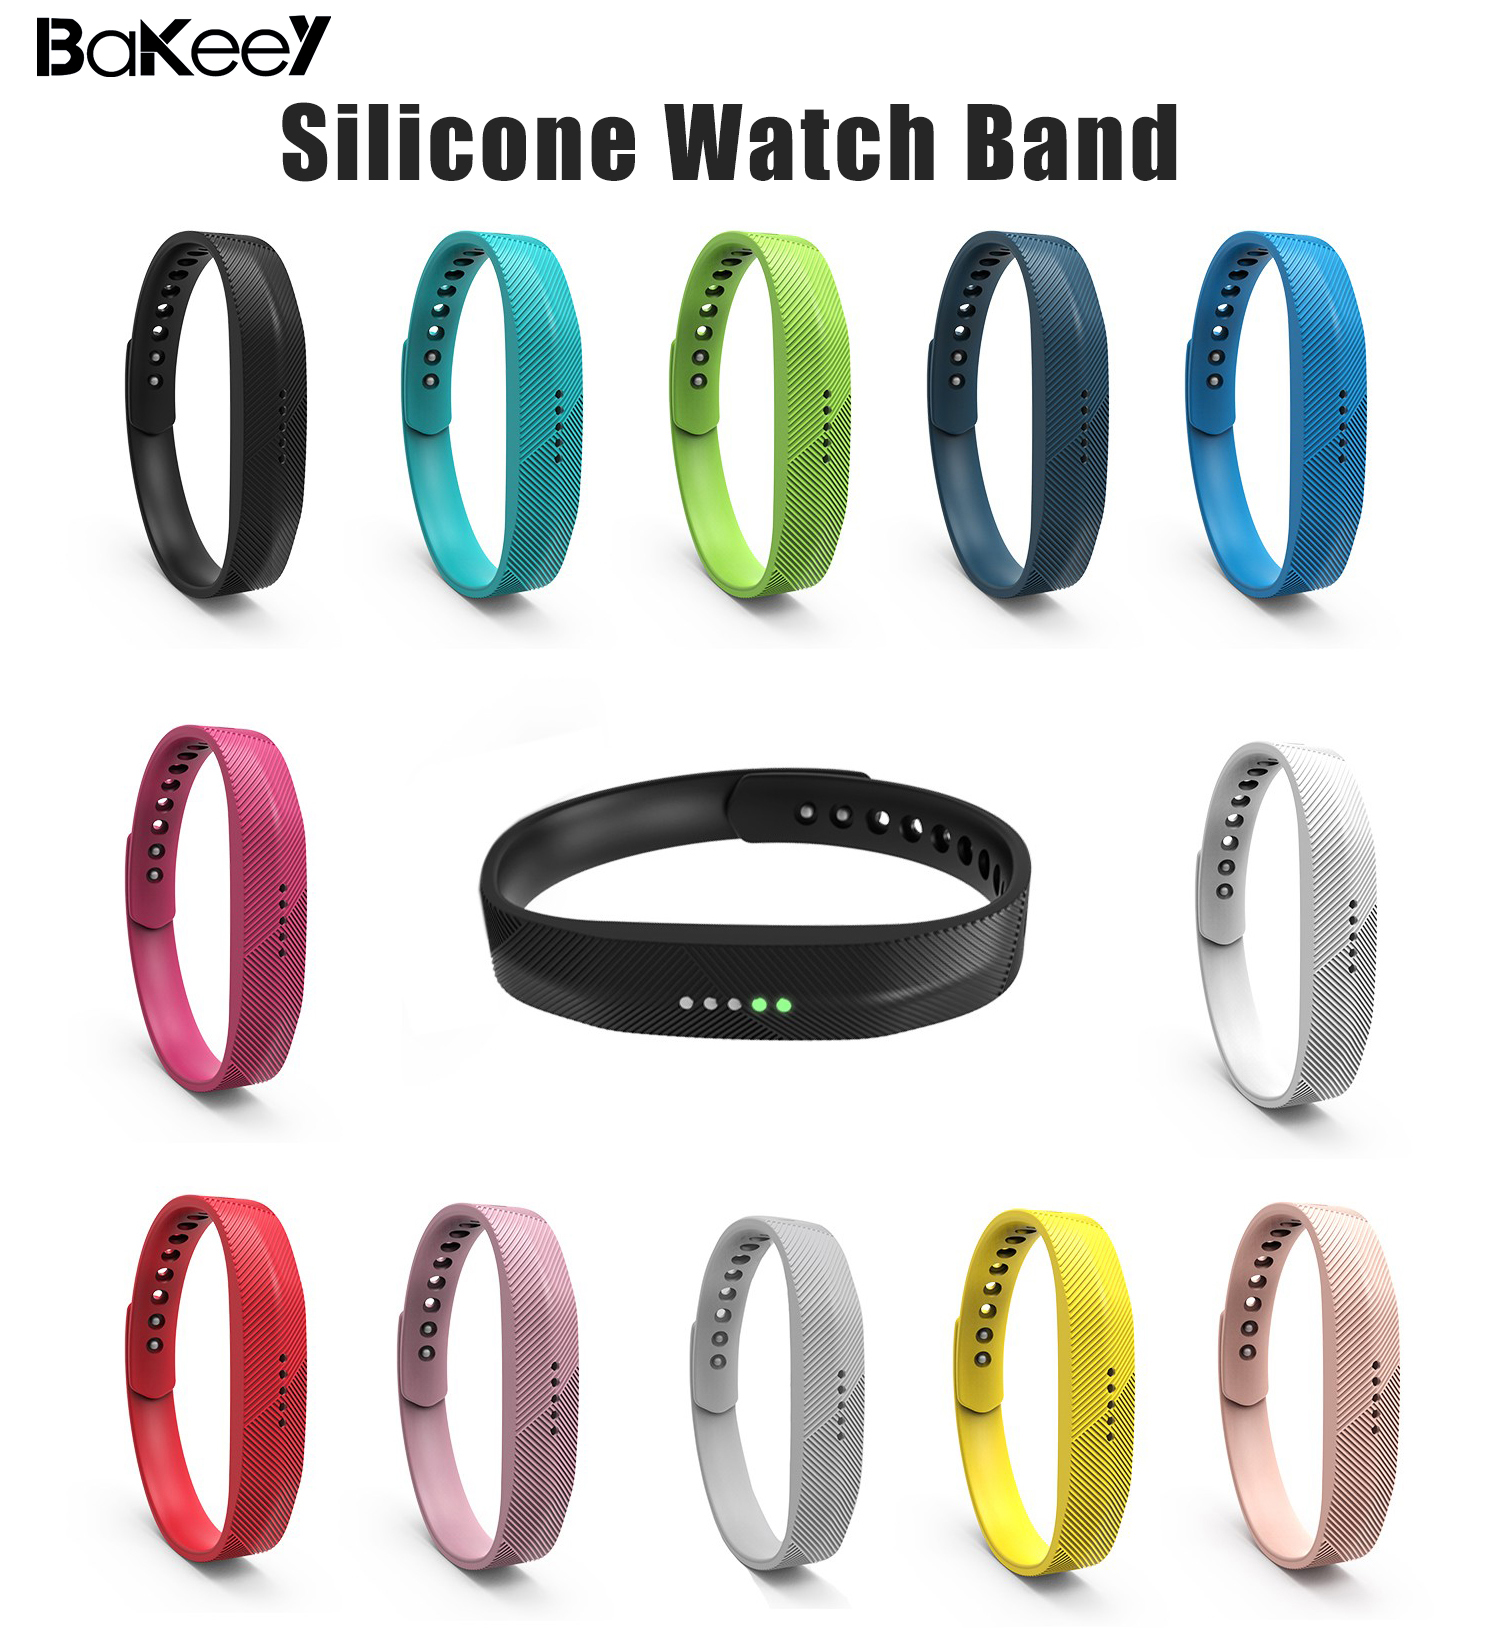 Bakeey-Multi-Color-Pure-Sports-T-Buckle-Soft-Silicone-Watch-Band-Strap-Replacement-for-Fitbit-Flex2-1747383-1